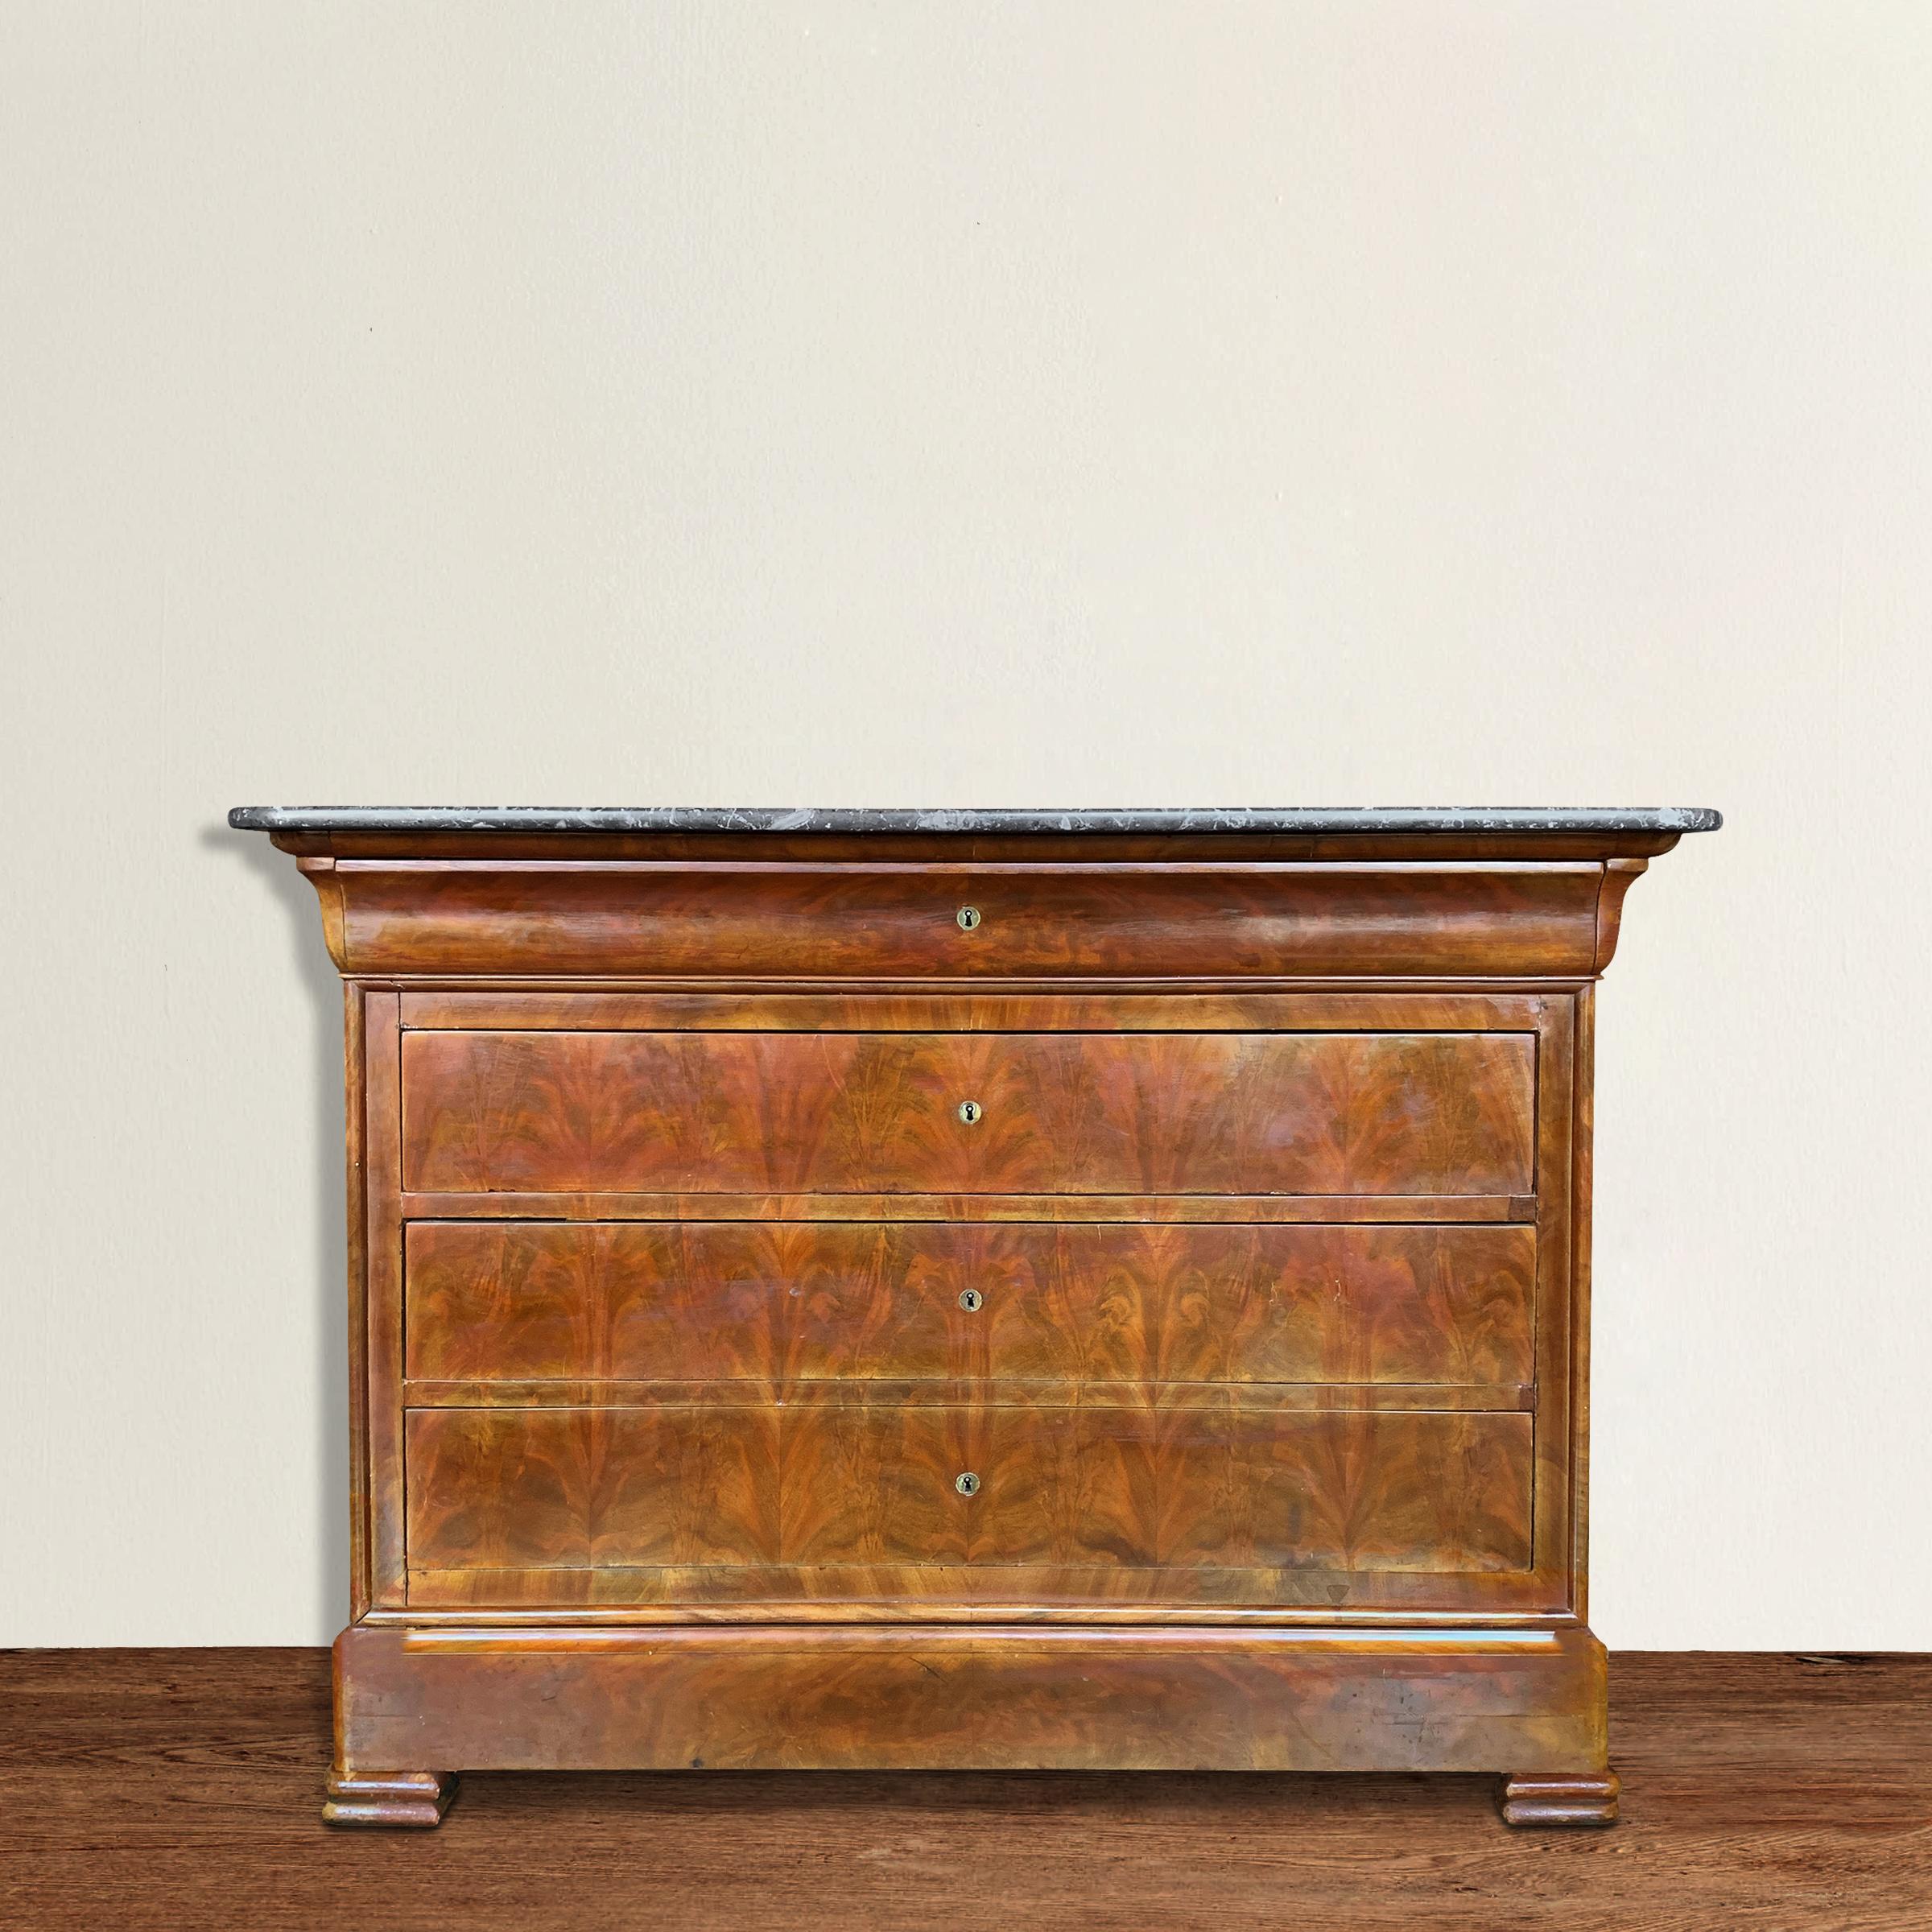 A striking early 19th century French Louis Philippe black marble-topped mahogany-stained walnut chest with four visible drawers with working locks, and another drawer hidden in the trim at the bottom. Original key included. The perfect nightstand or